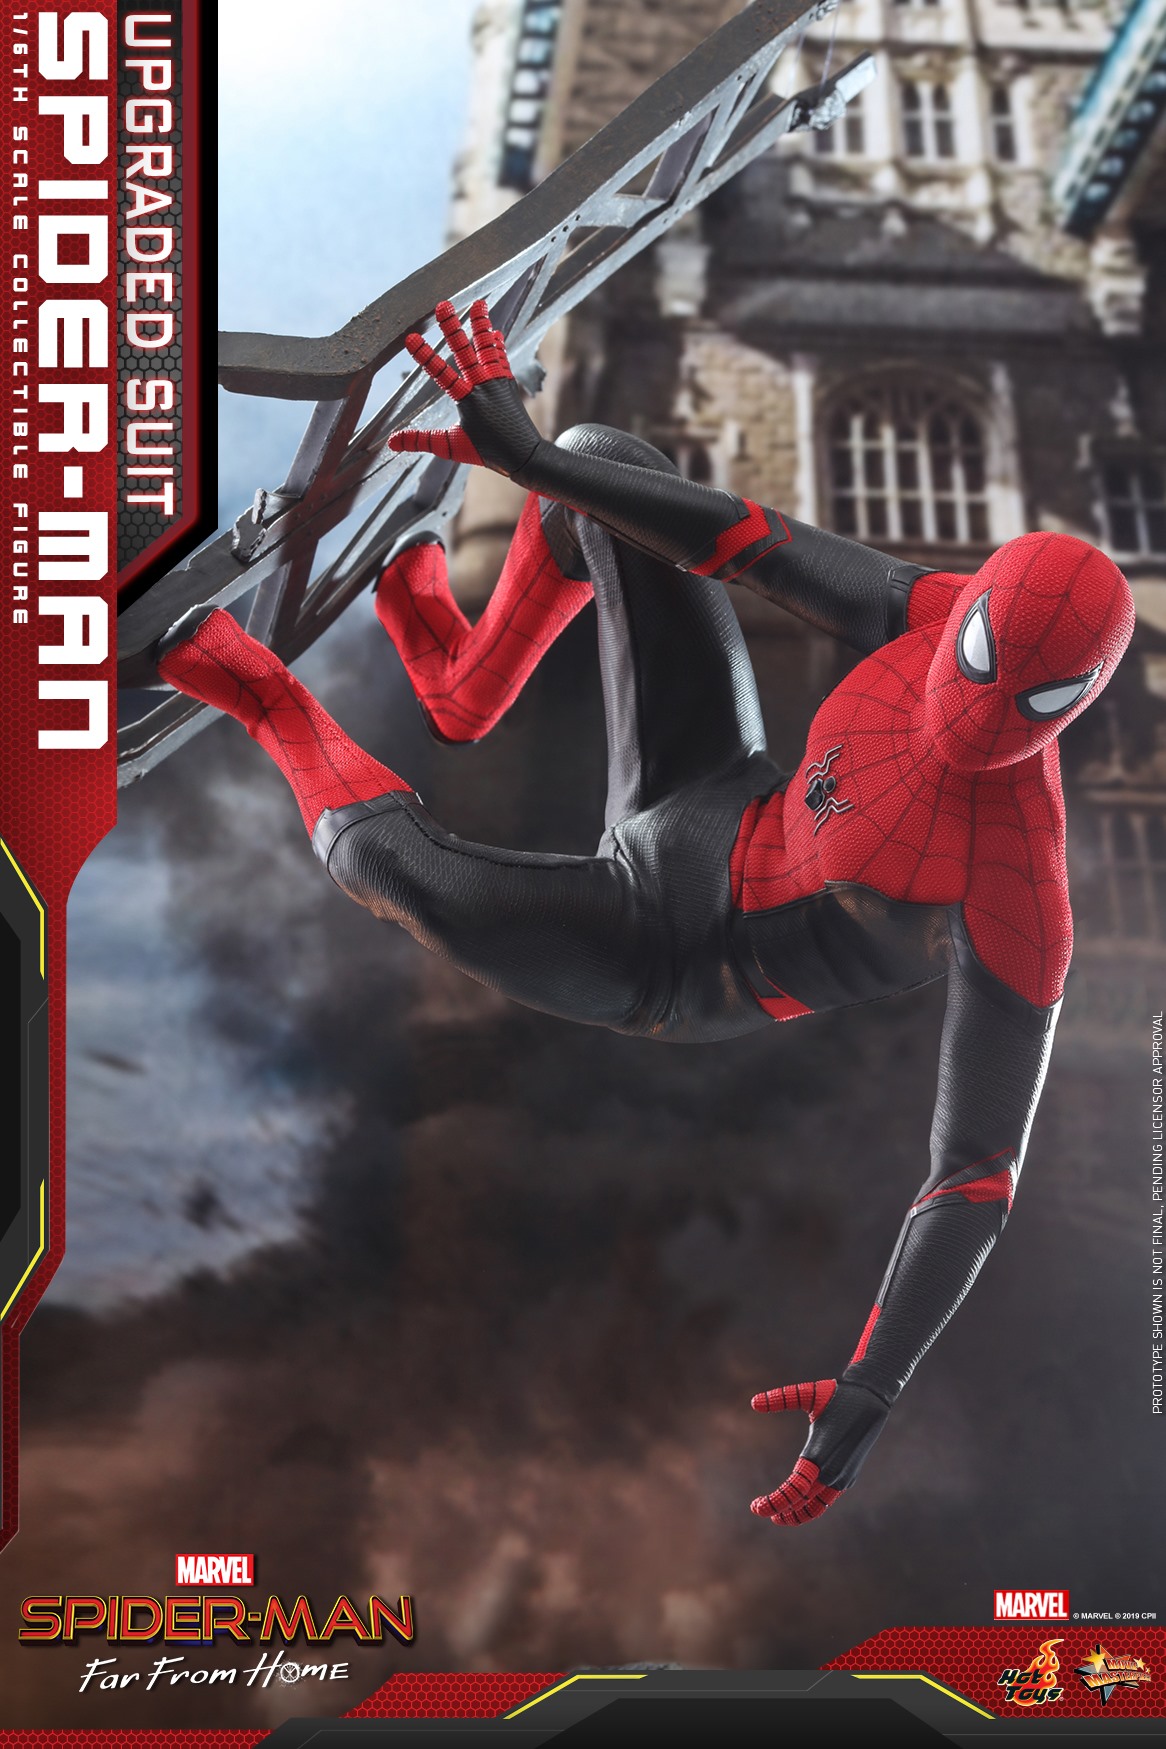 Spider-Man: No Way Home Final Suit Now Has a Hot Toys Figure